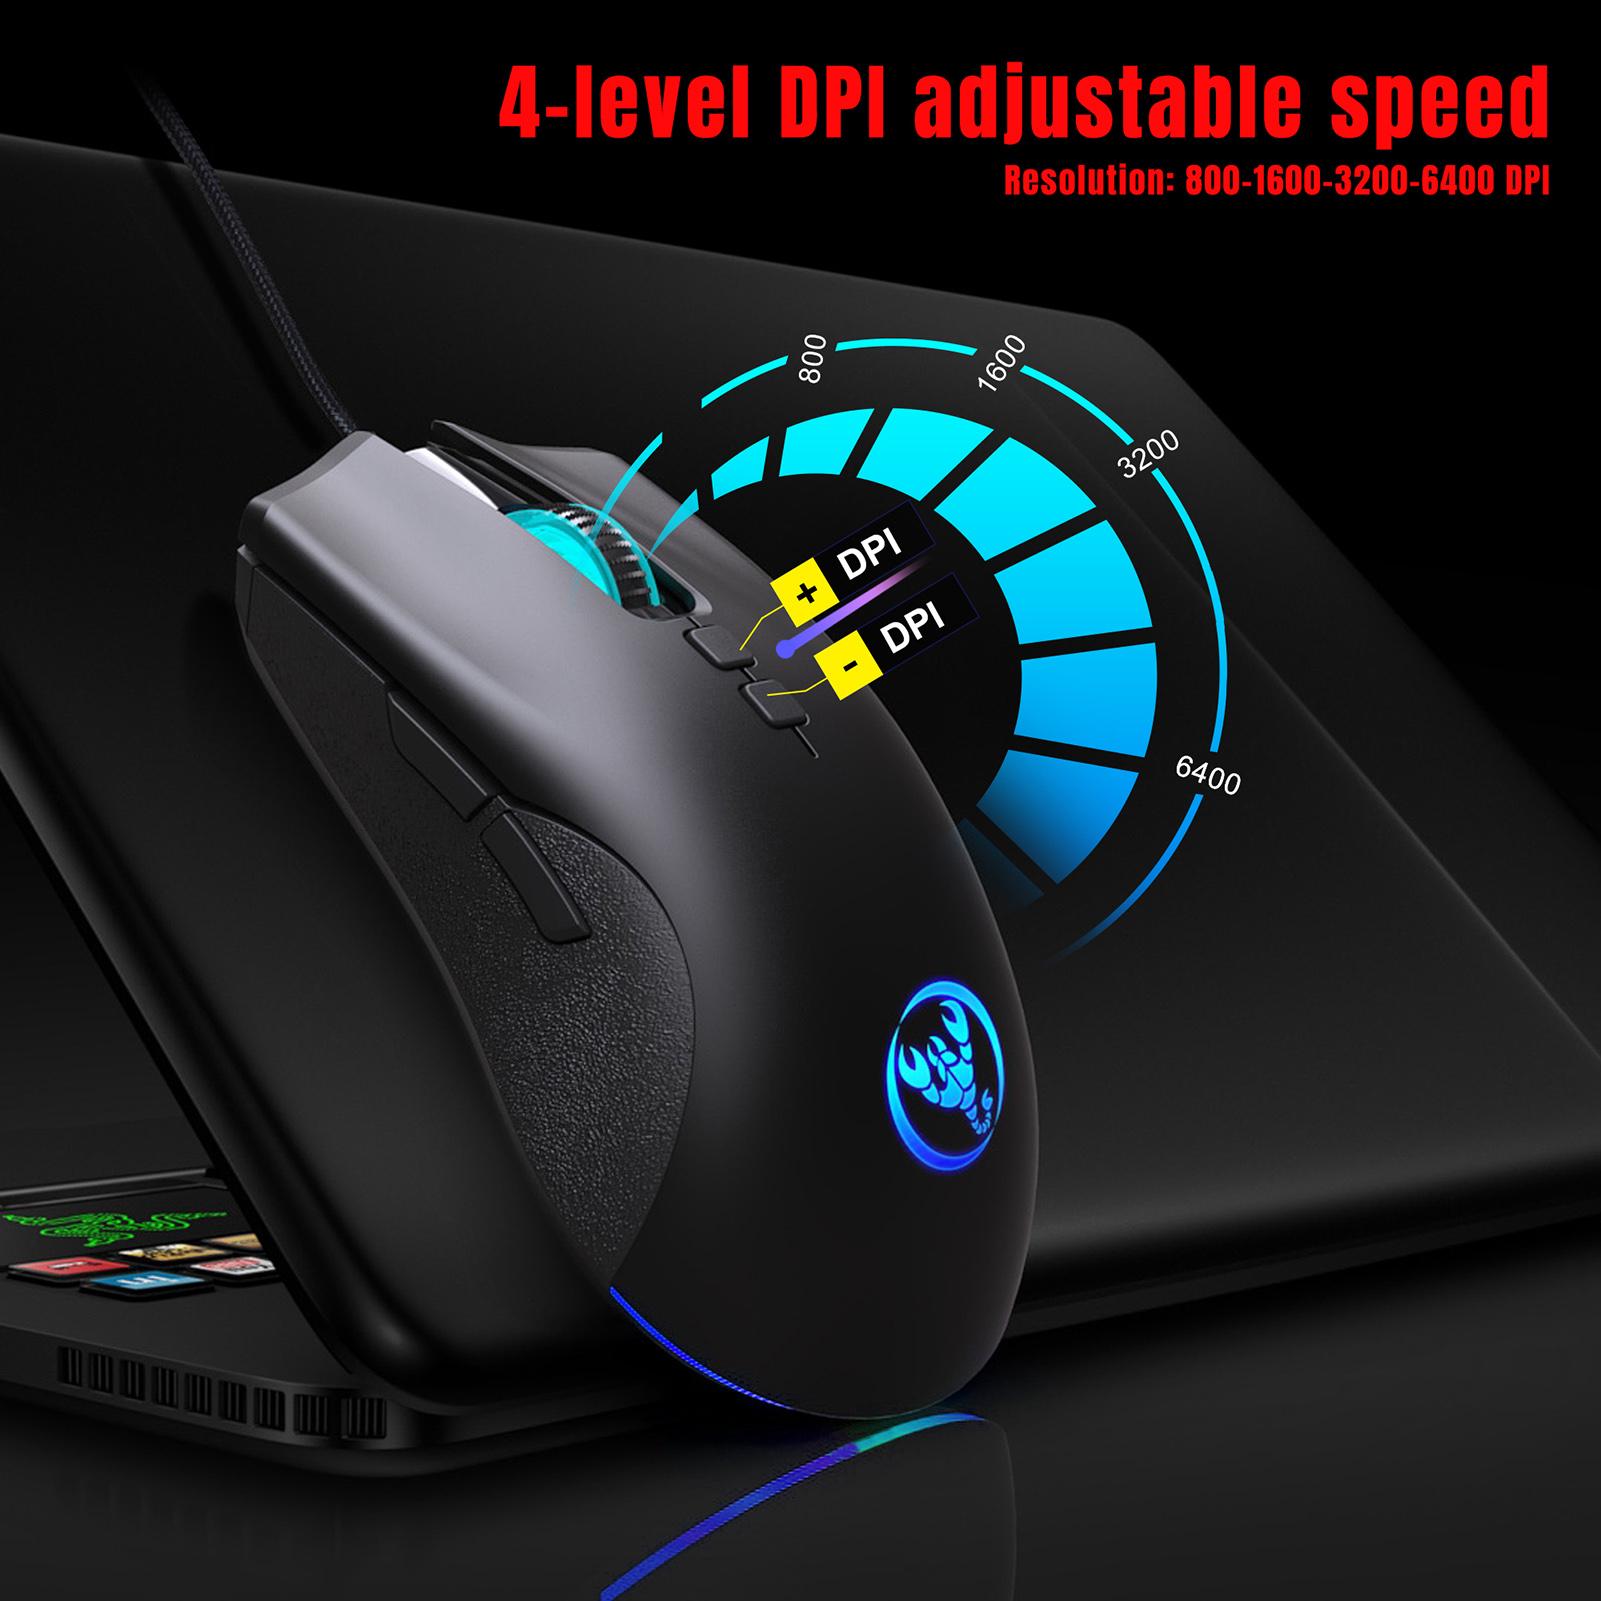 HXSJ A883 Wired Gaming Mouse 7 Buttons Gaming Mouse with Four-level Adjustable DPI Erogonomcic Design for Dsektop